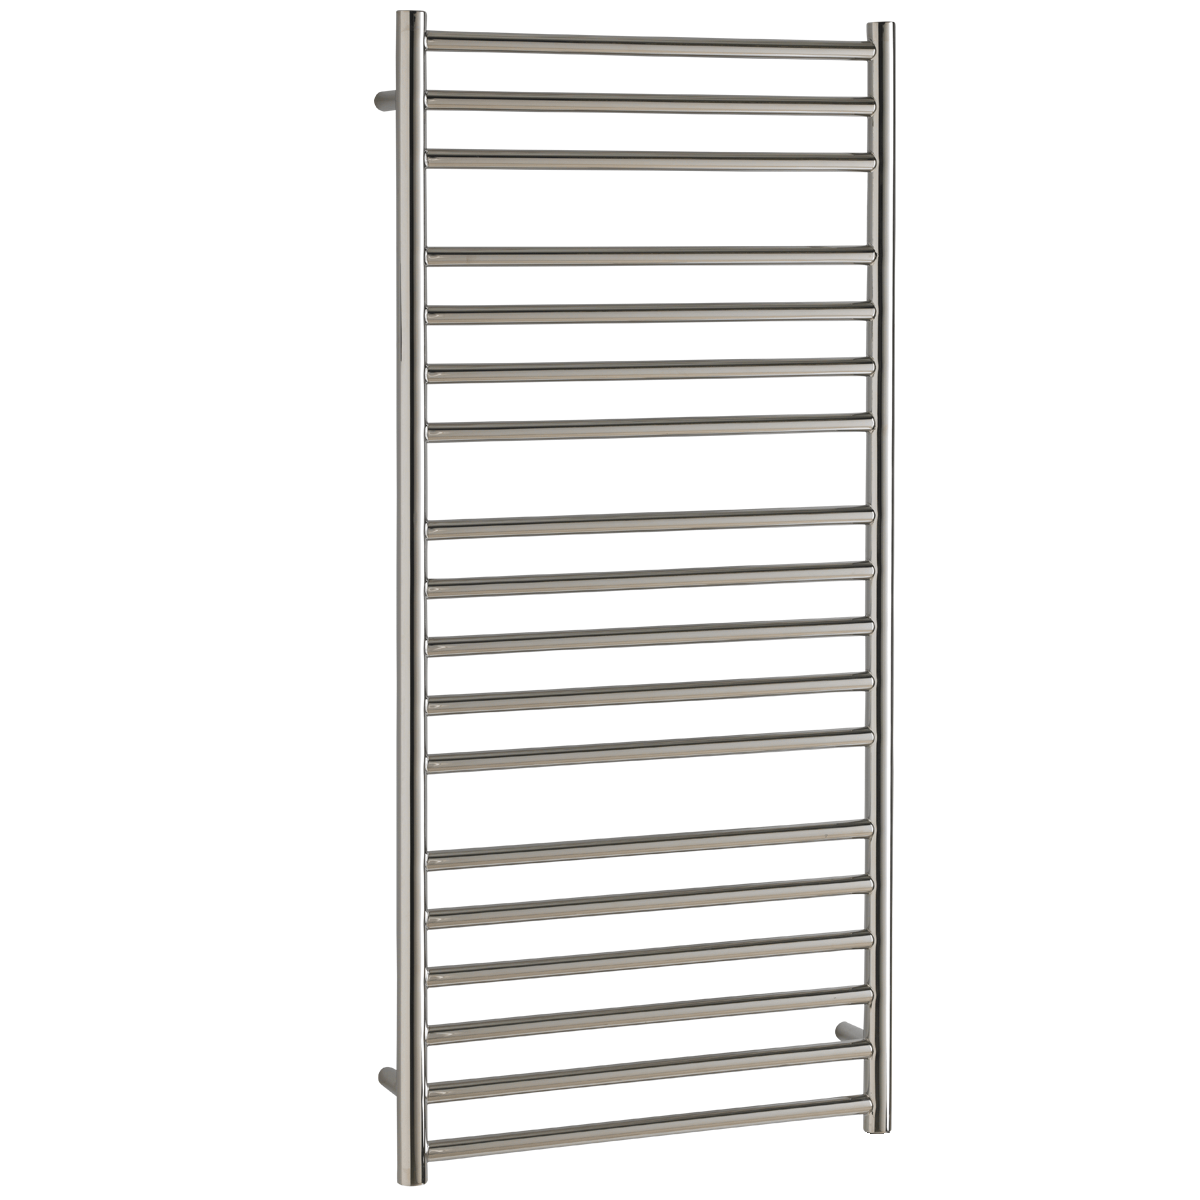 Aura Steel Stainless Steel Dual Fuel Towel Rail with Thermostat, Timer + WiFi Control Efficient Heating, Well Made, Excellent Value Buy Online From Solaire Quartz UK Shop 12